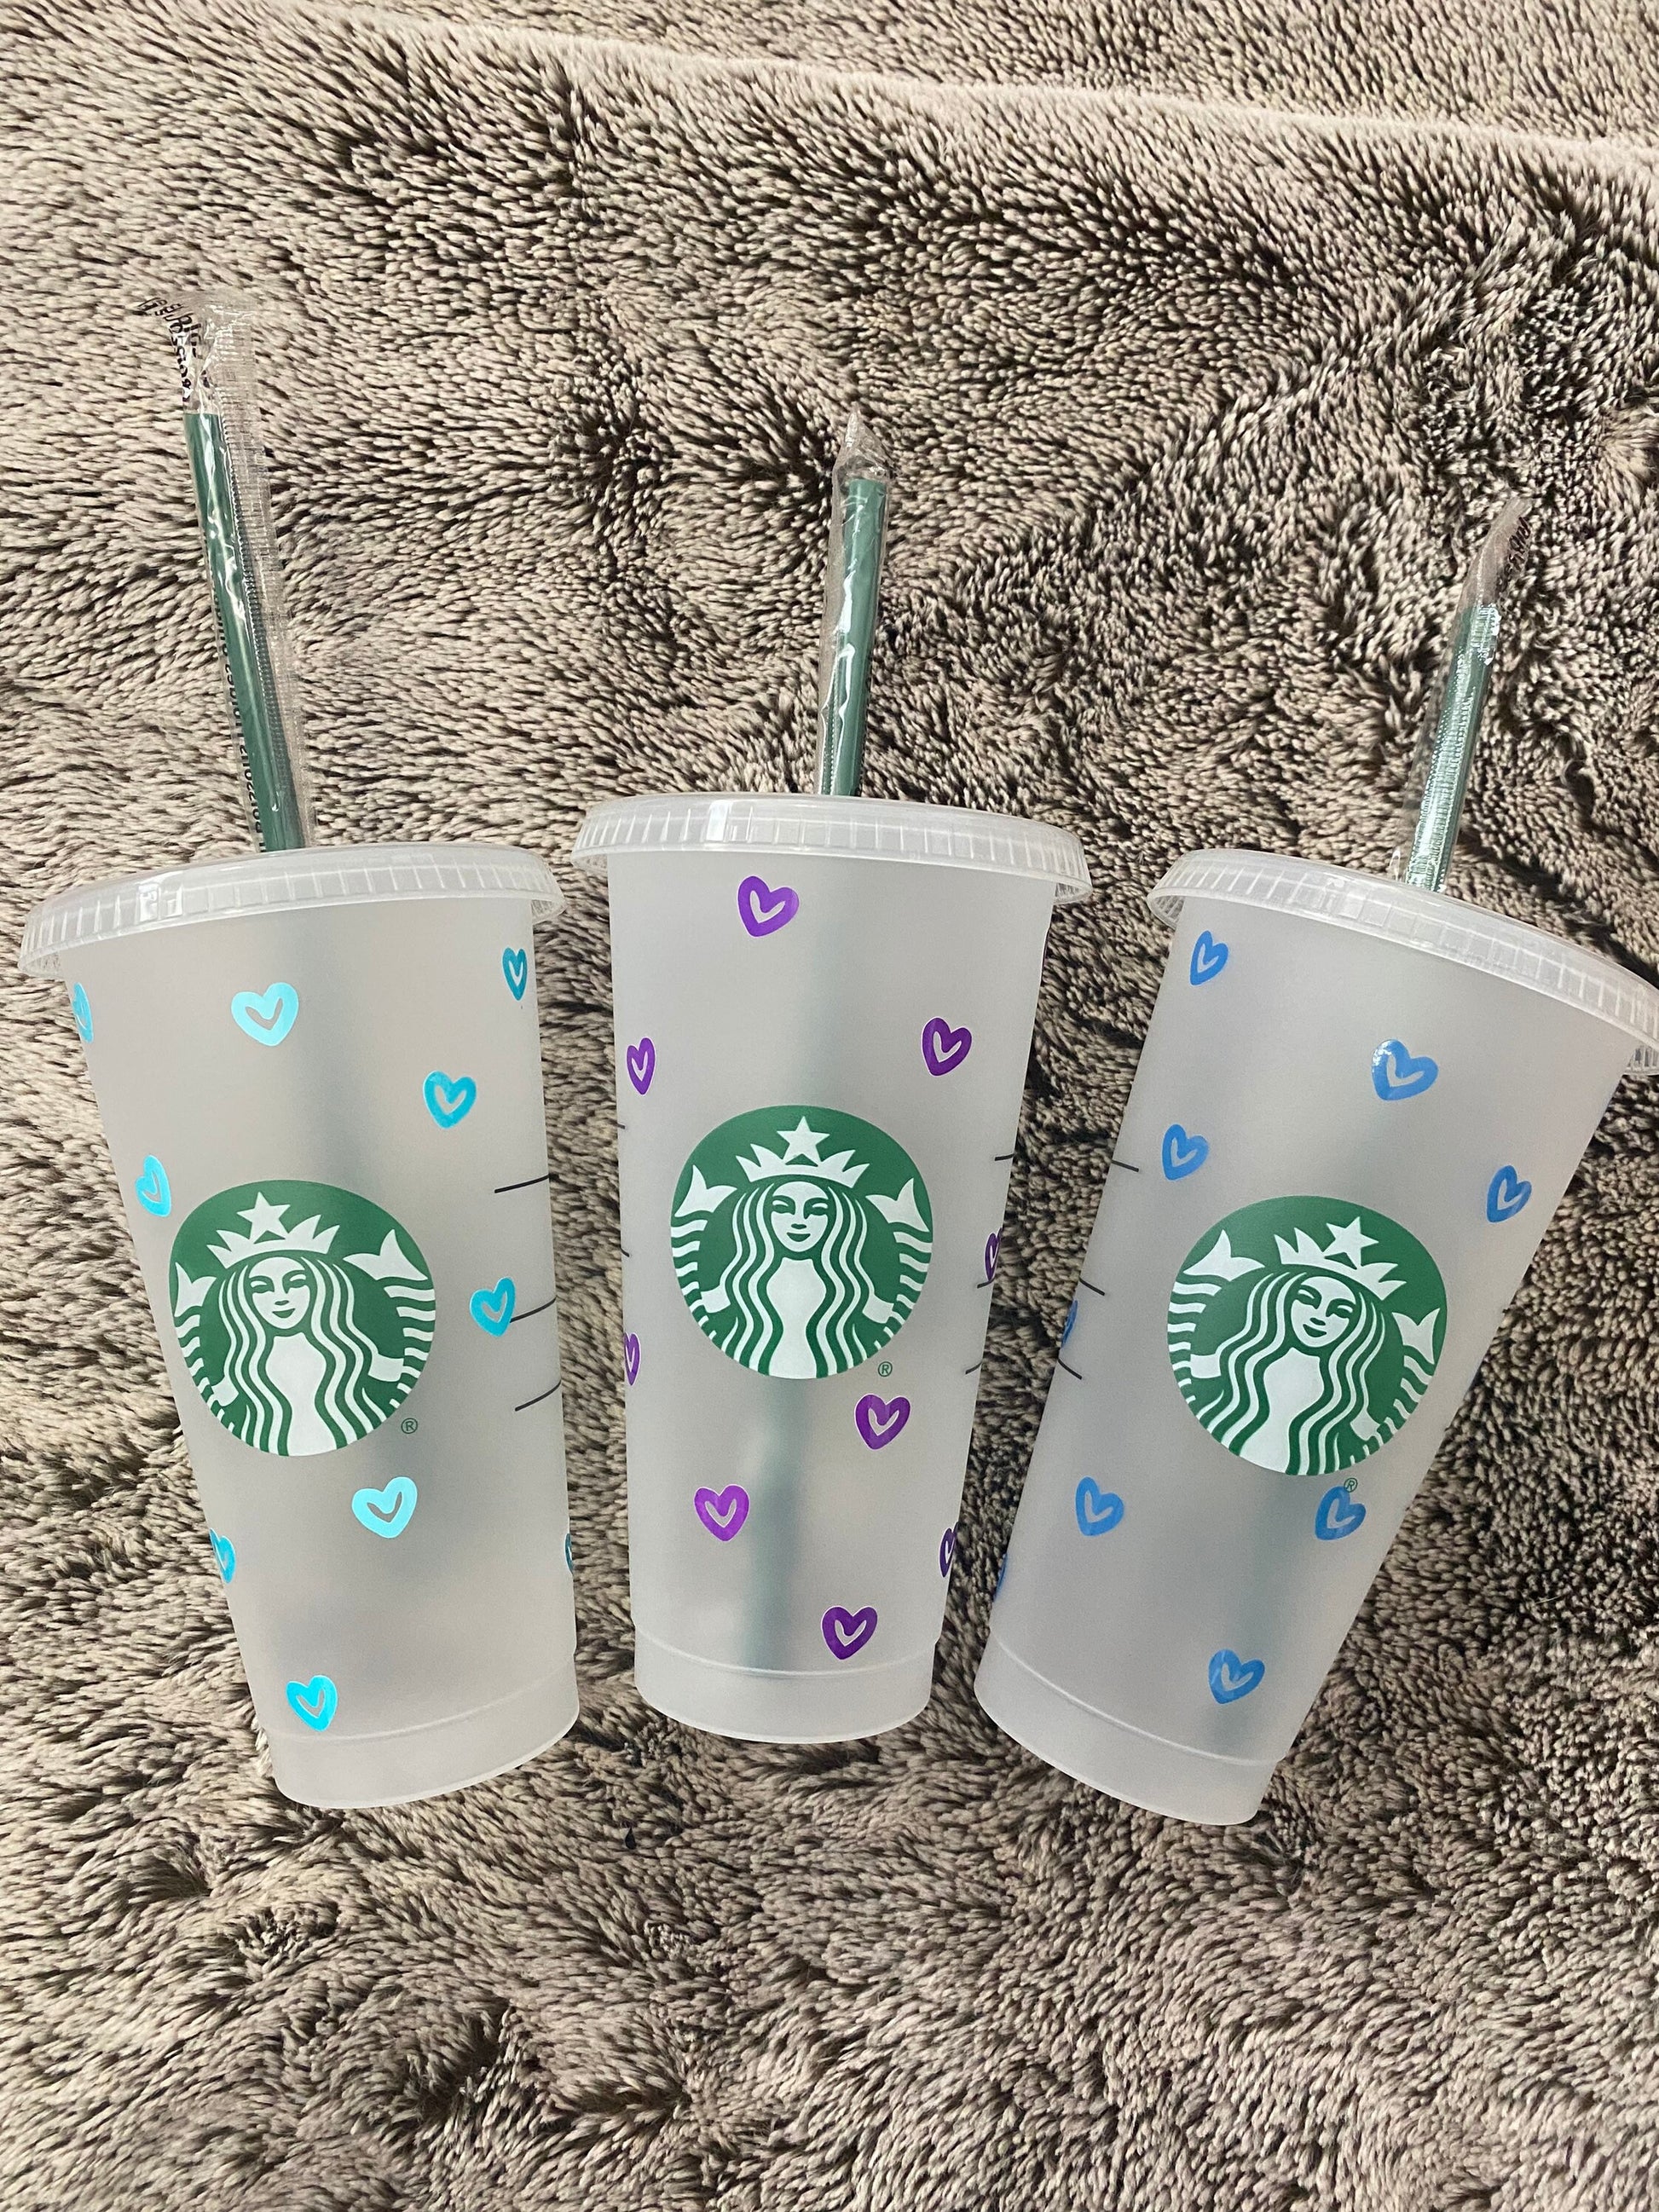 Personalized Starbucks Cups With Cricut 